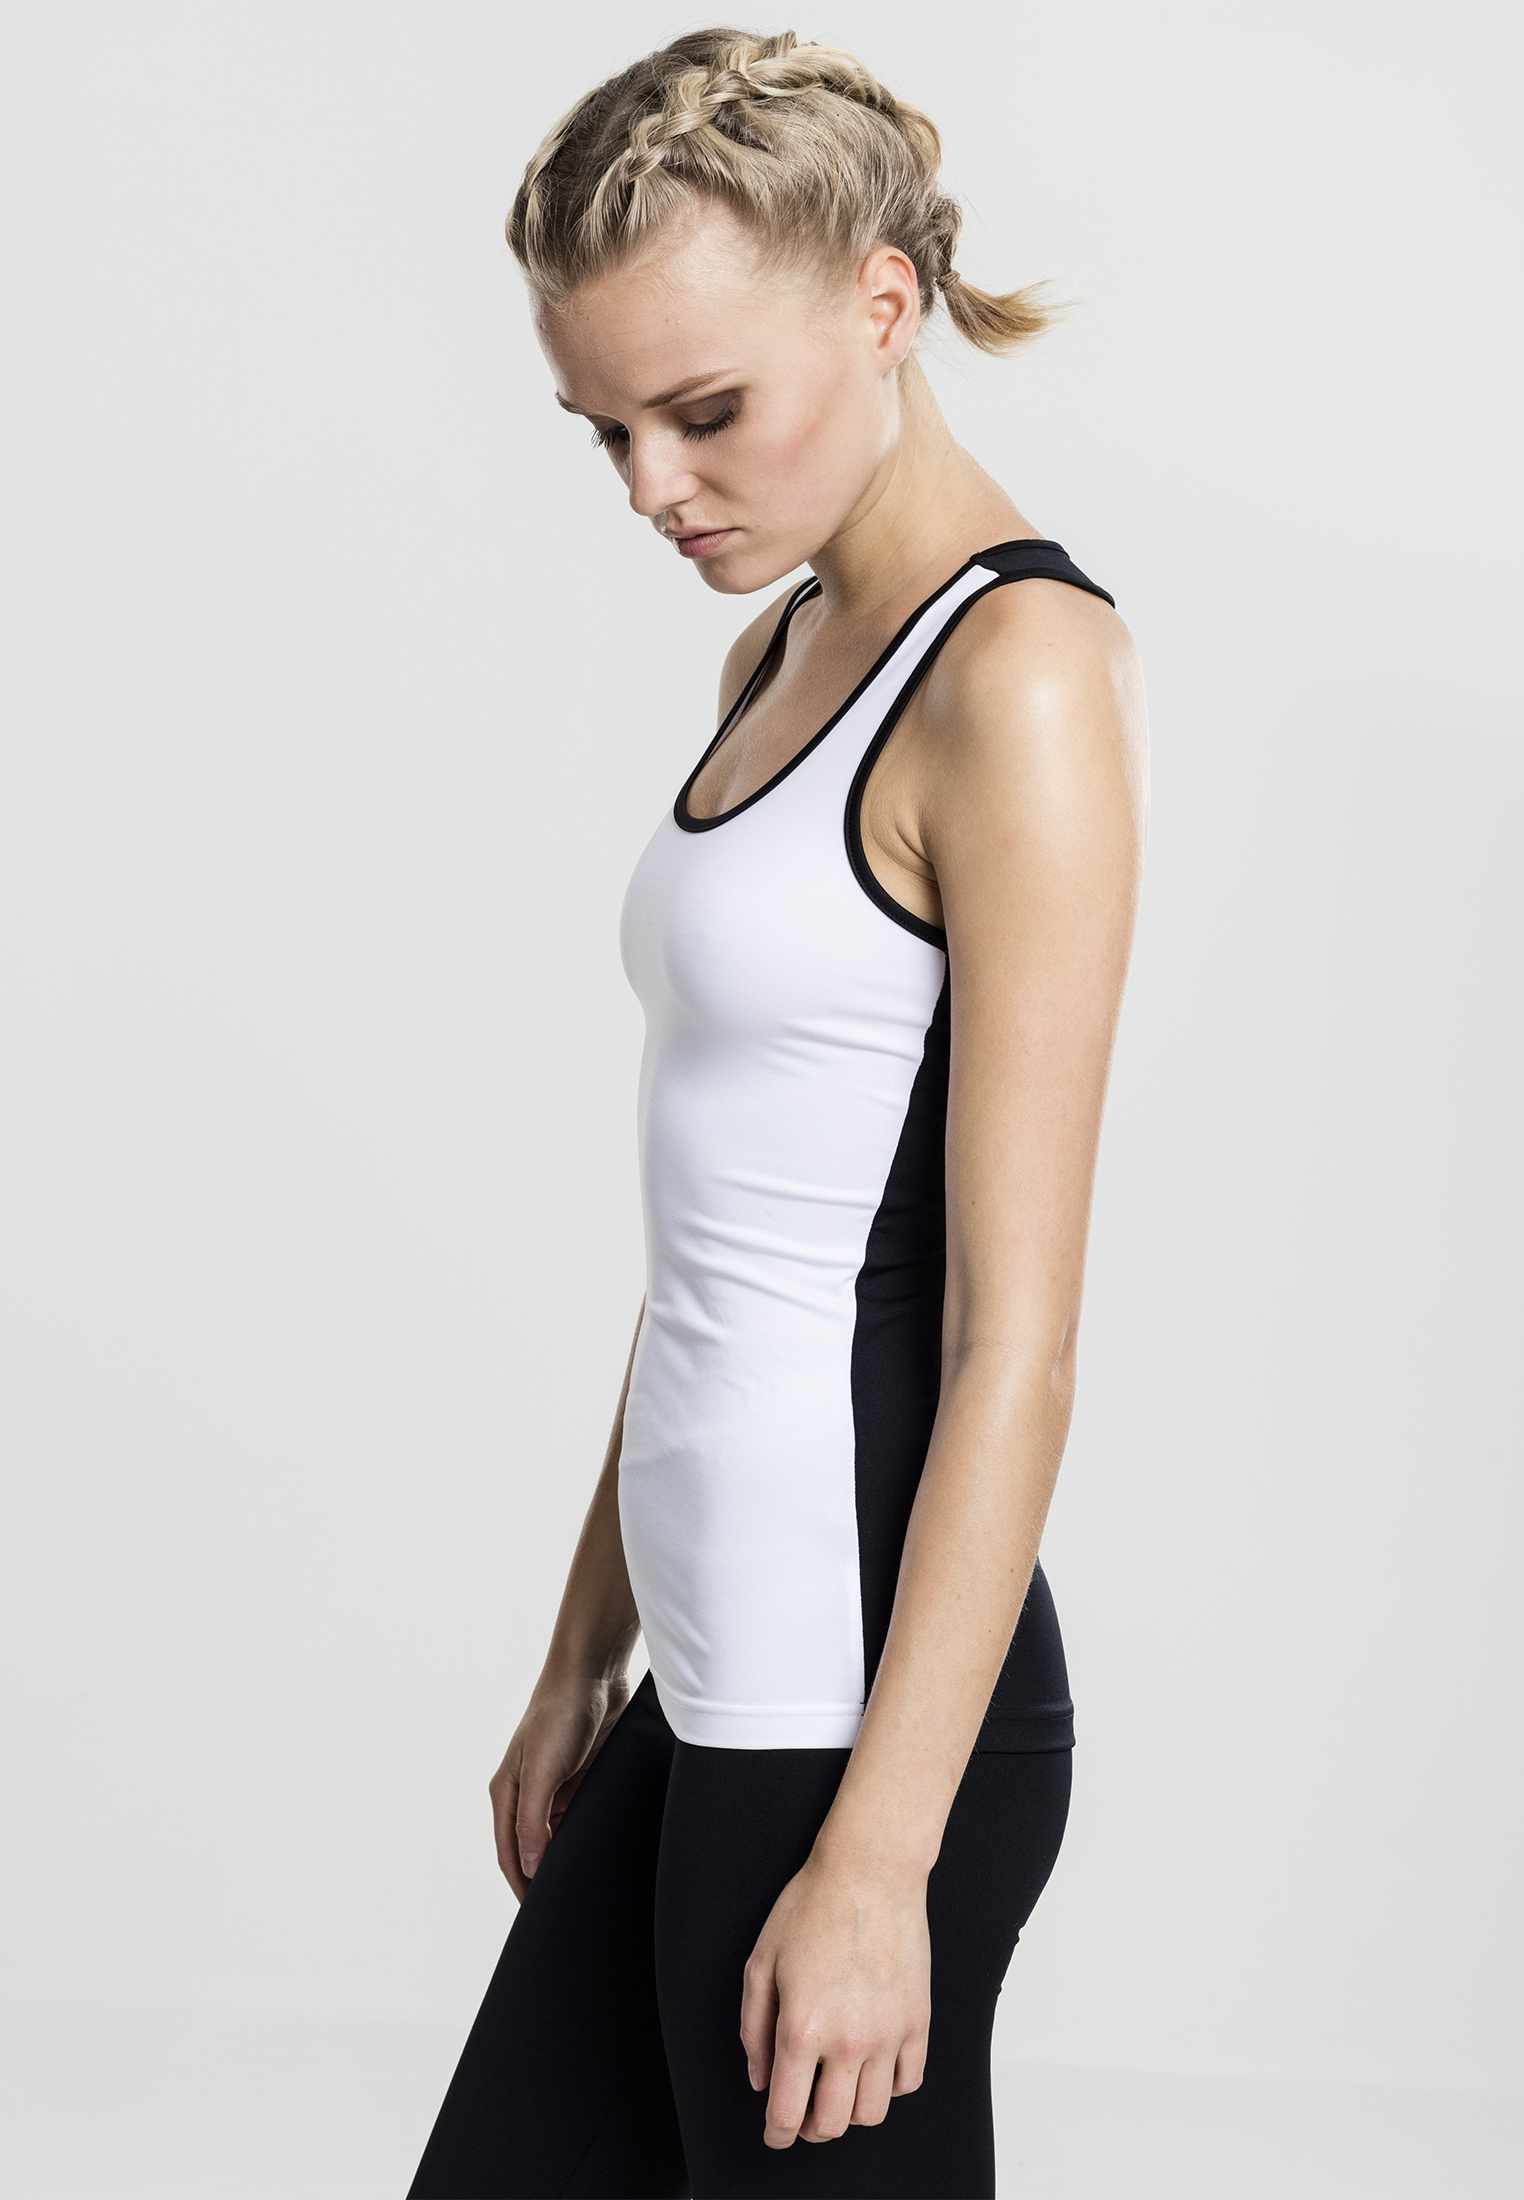 Athleisure Ladies Sports Top in Farbe wht/blk